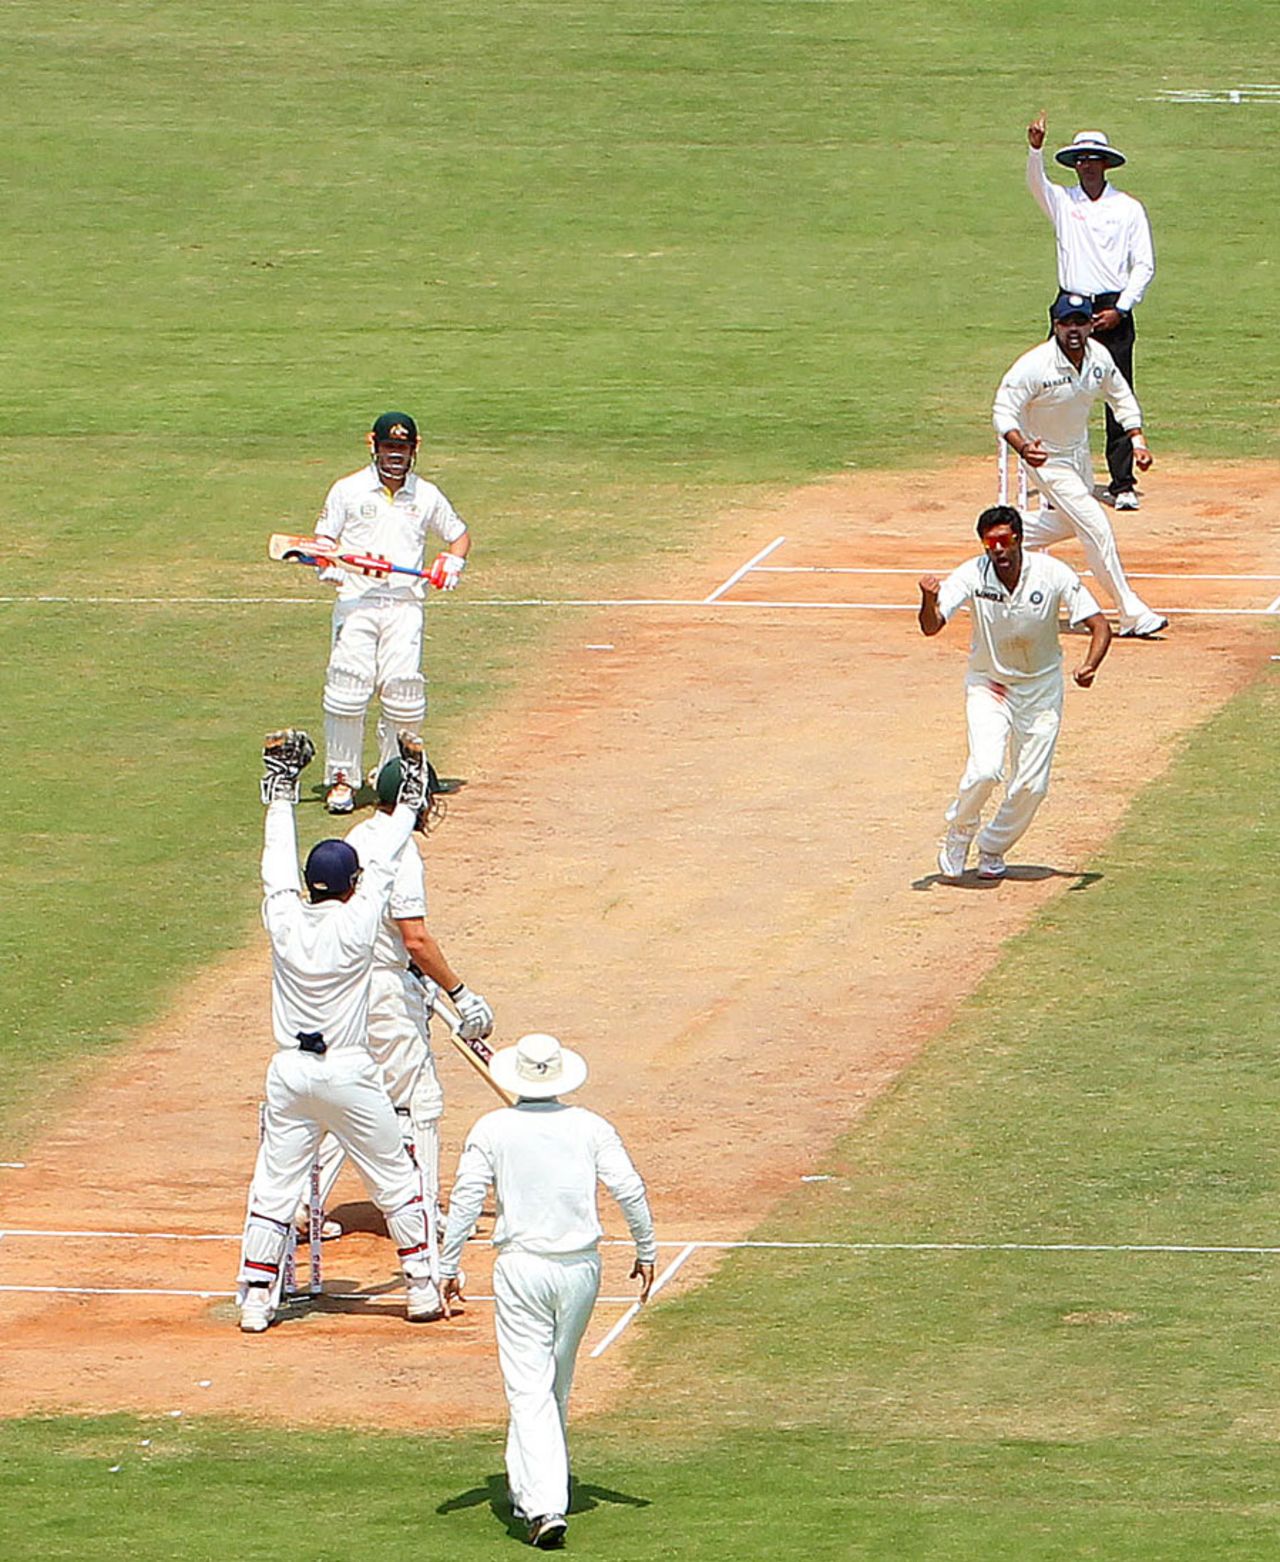 Matthew Wade was out lbw to R Ashwin, India v Australia, 1st Test, Chennai, 1st day, February 22, 2013